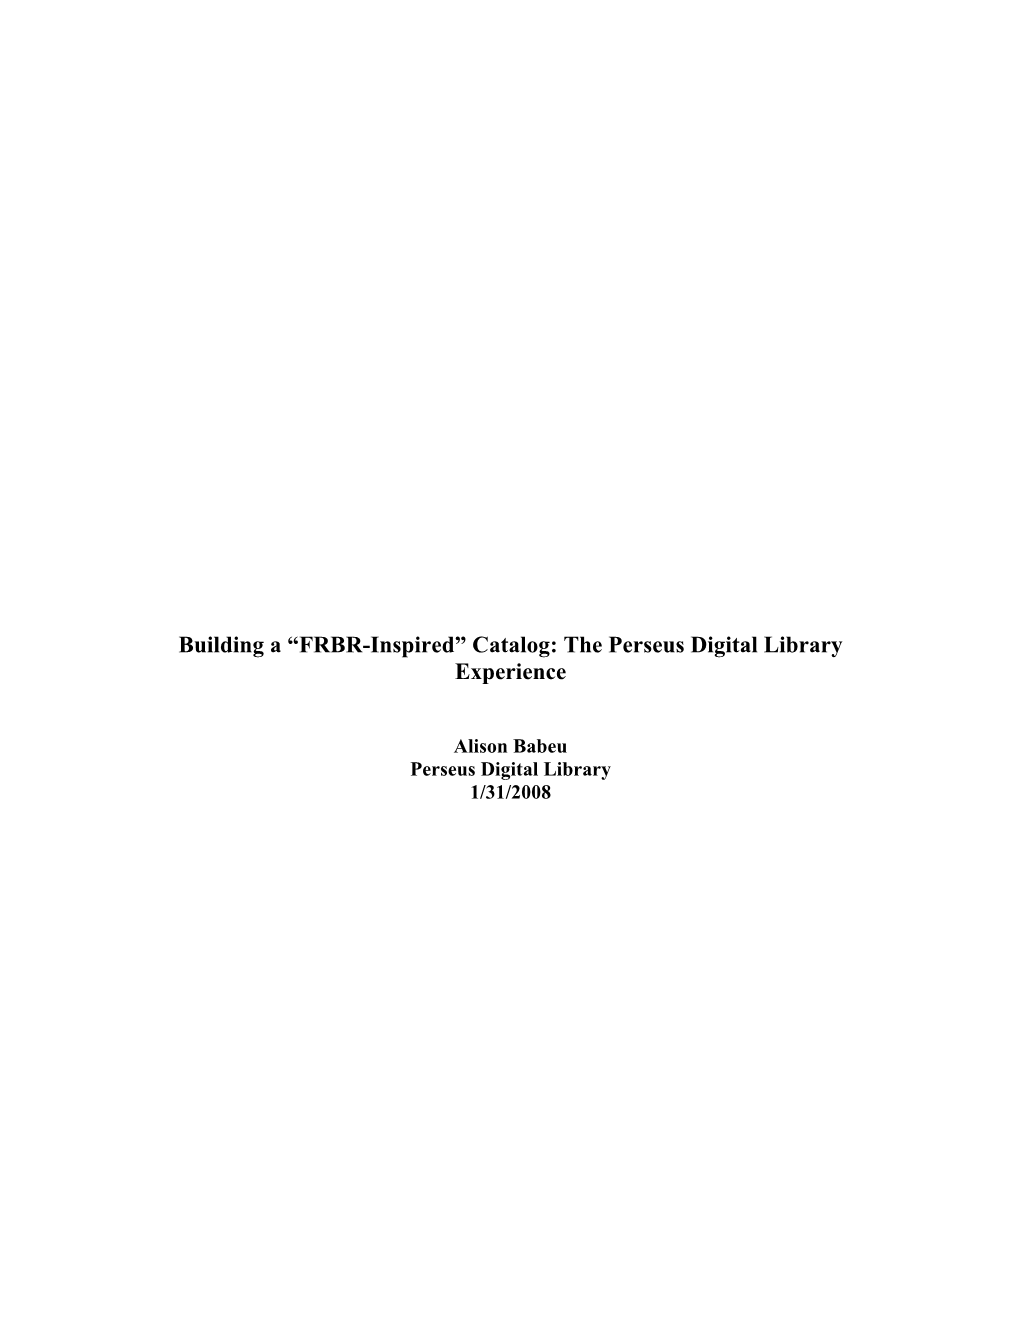 The FRBR Bomb: Or How I Learned to Love the Catalog